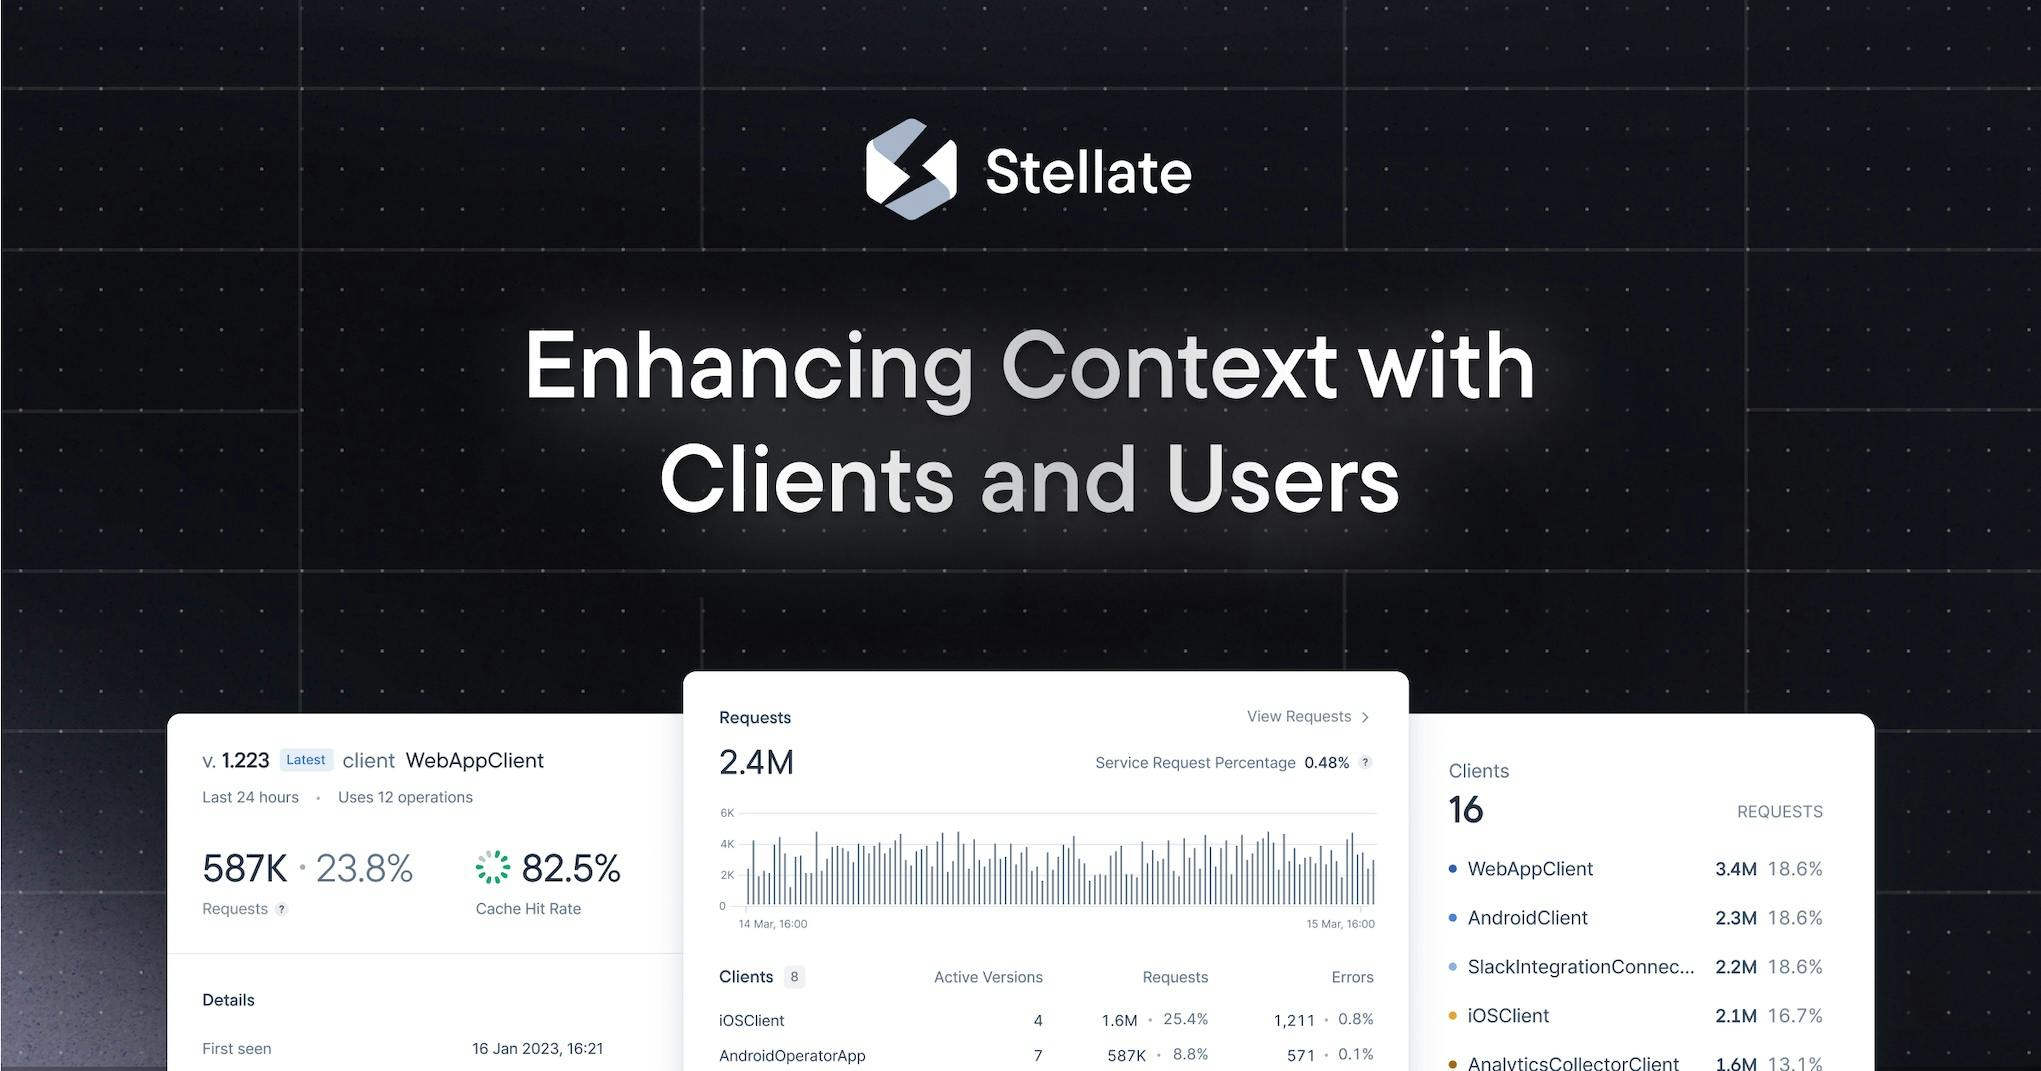 Enhancing Context with Clients and Users